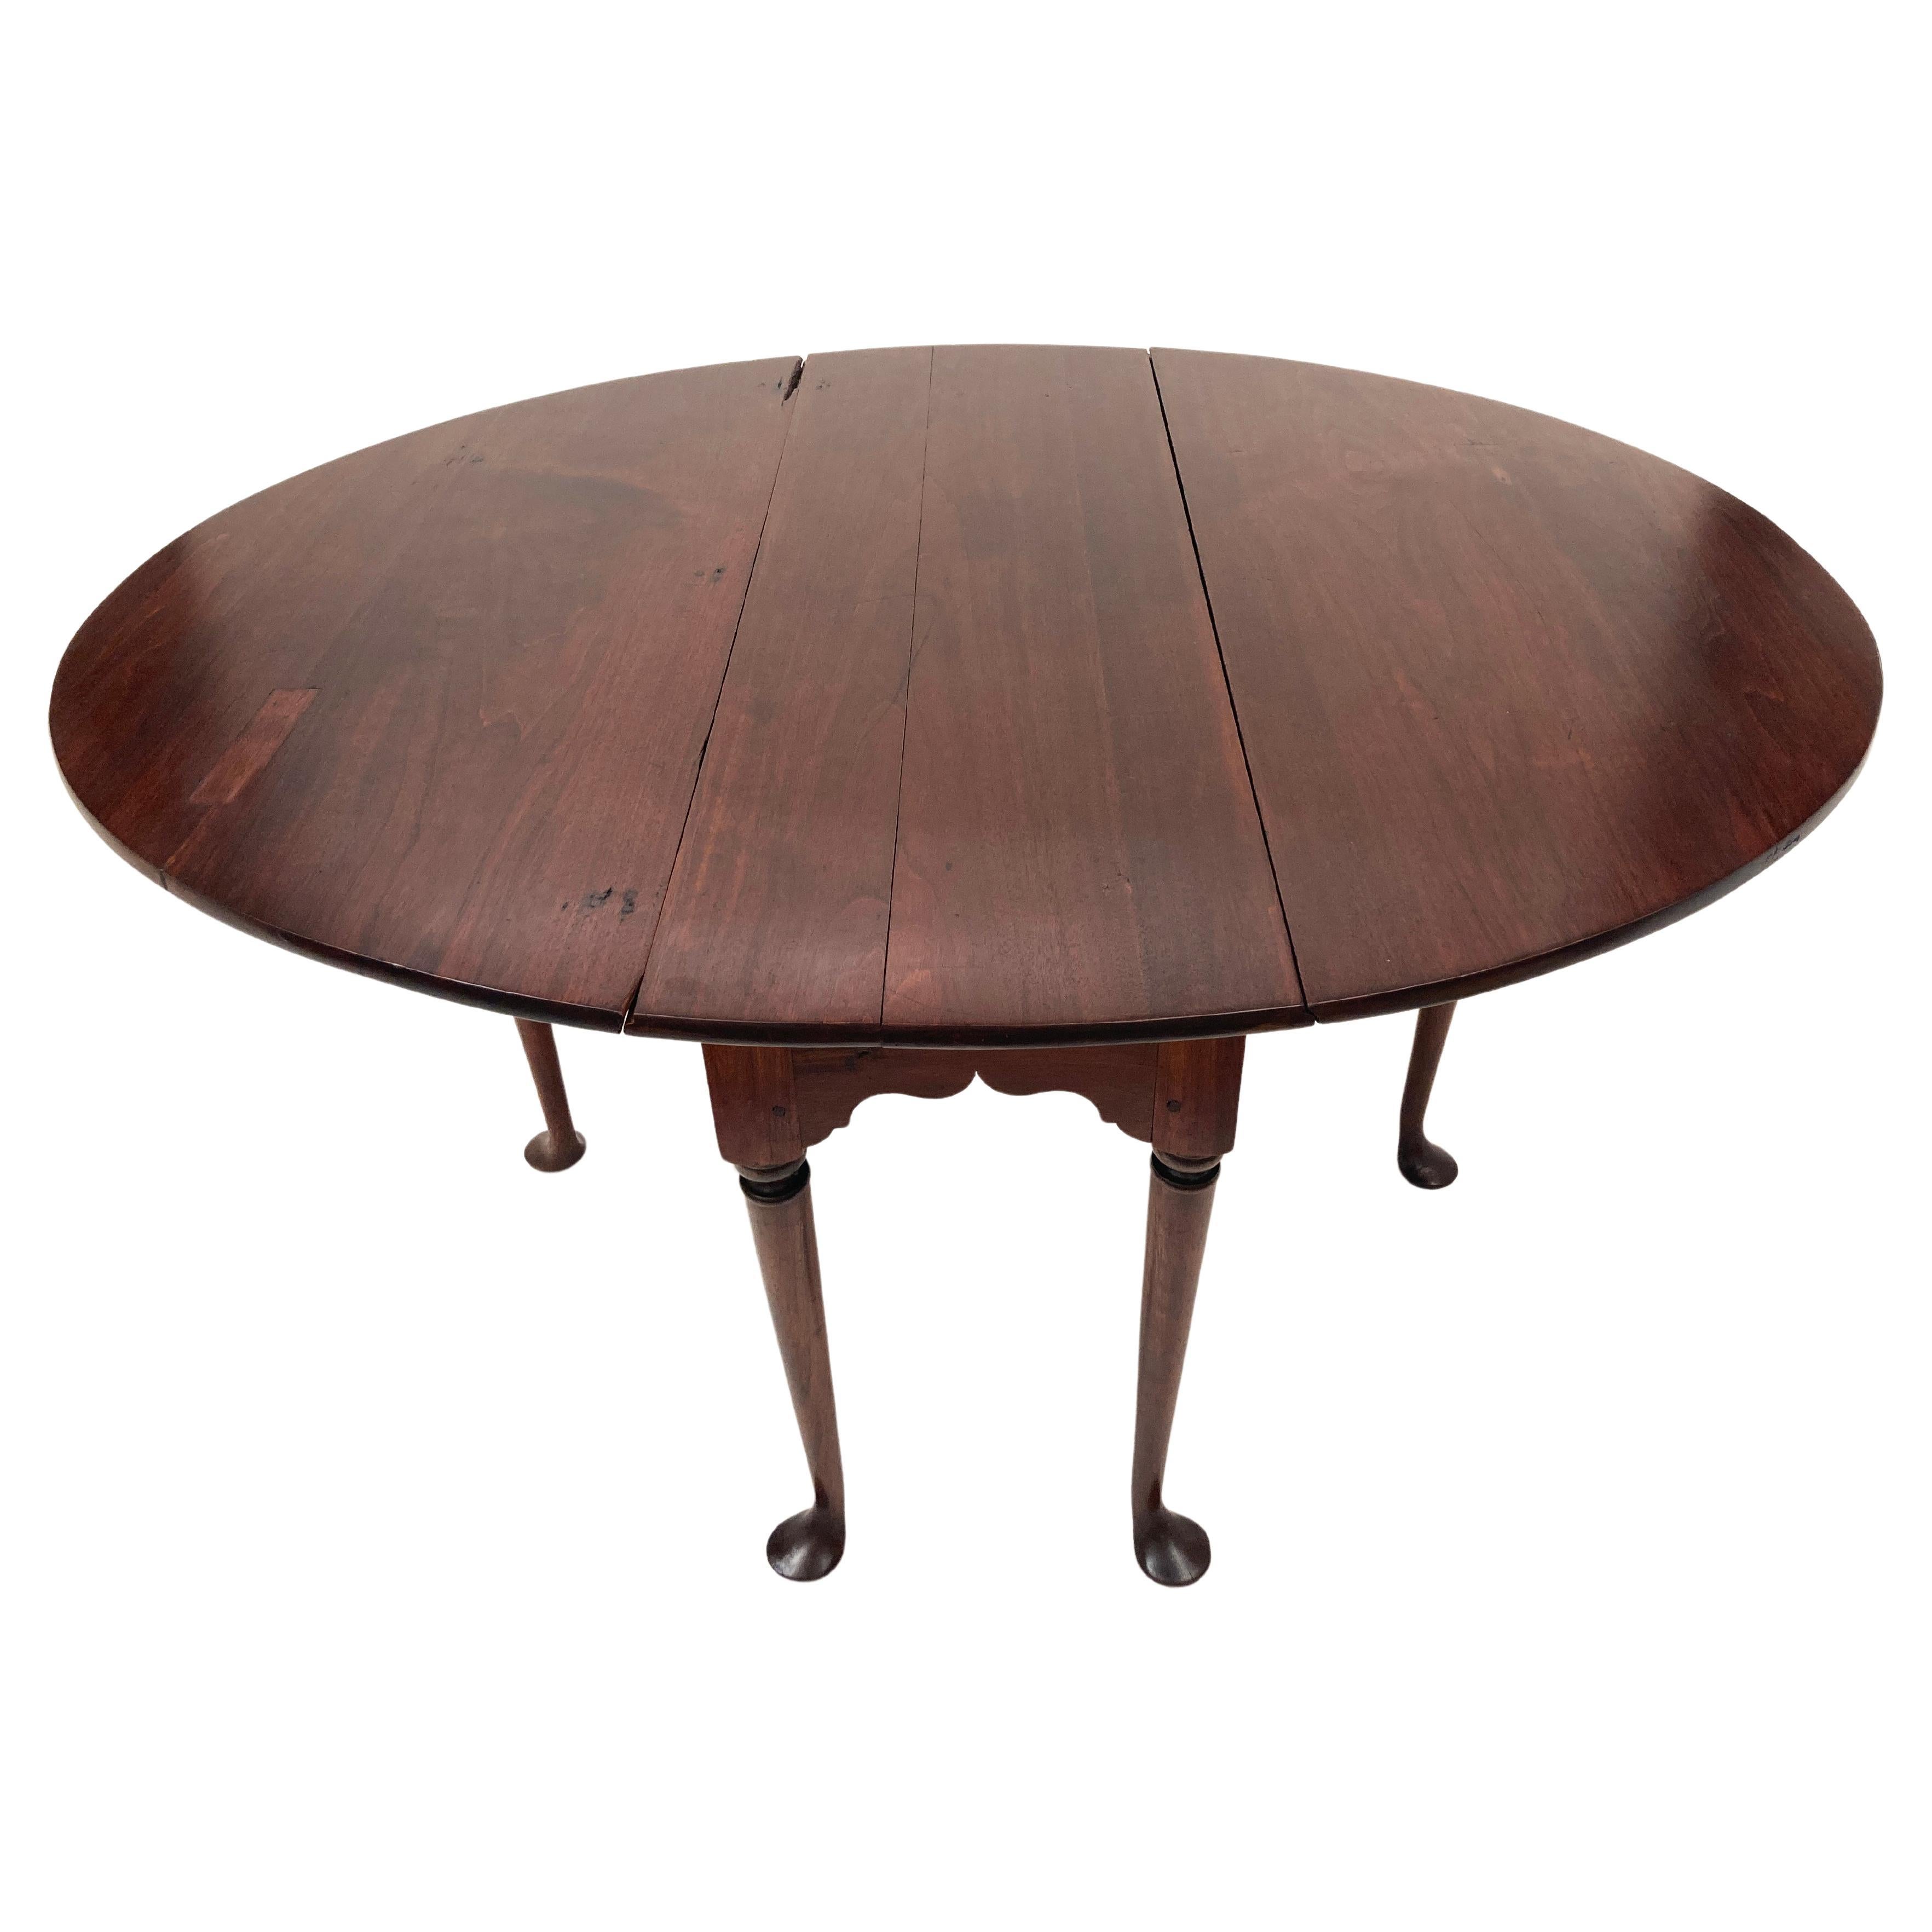 1700’s Kentucky Mahogany Drop Leaf Dining Table With Gate-Legs For Sale